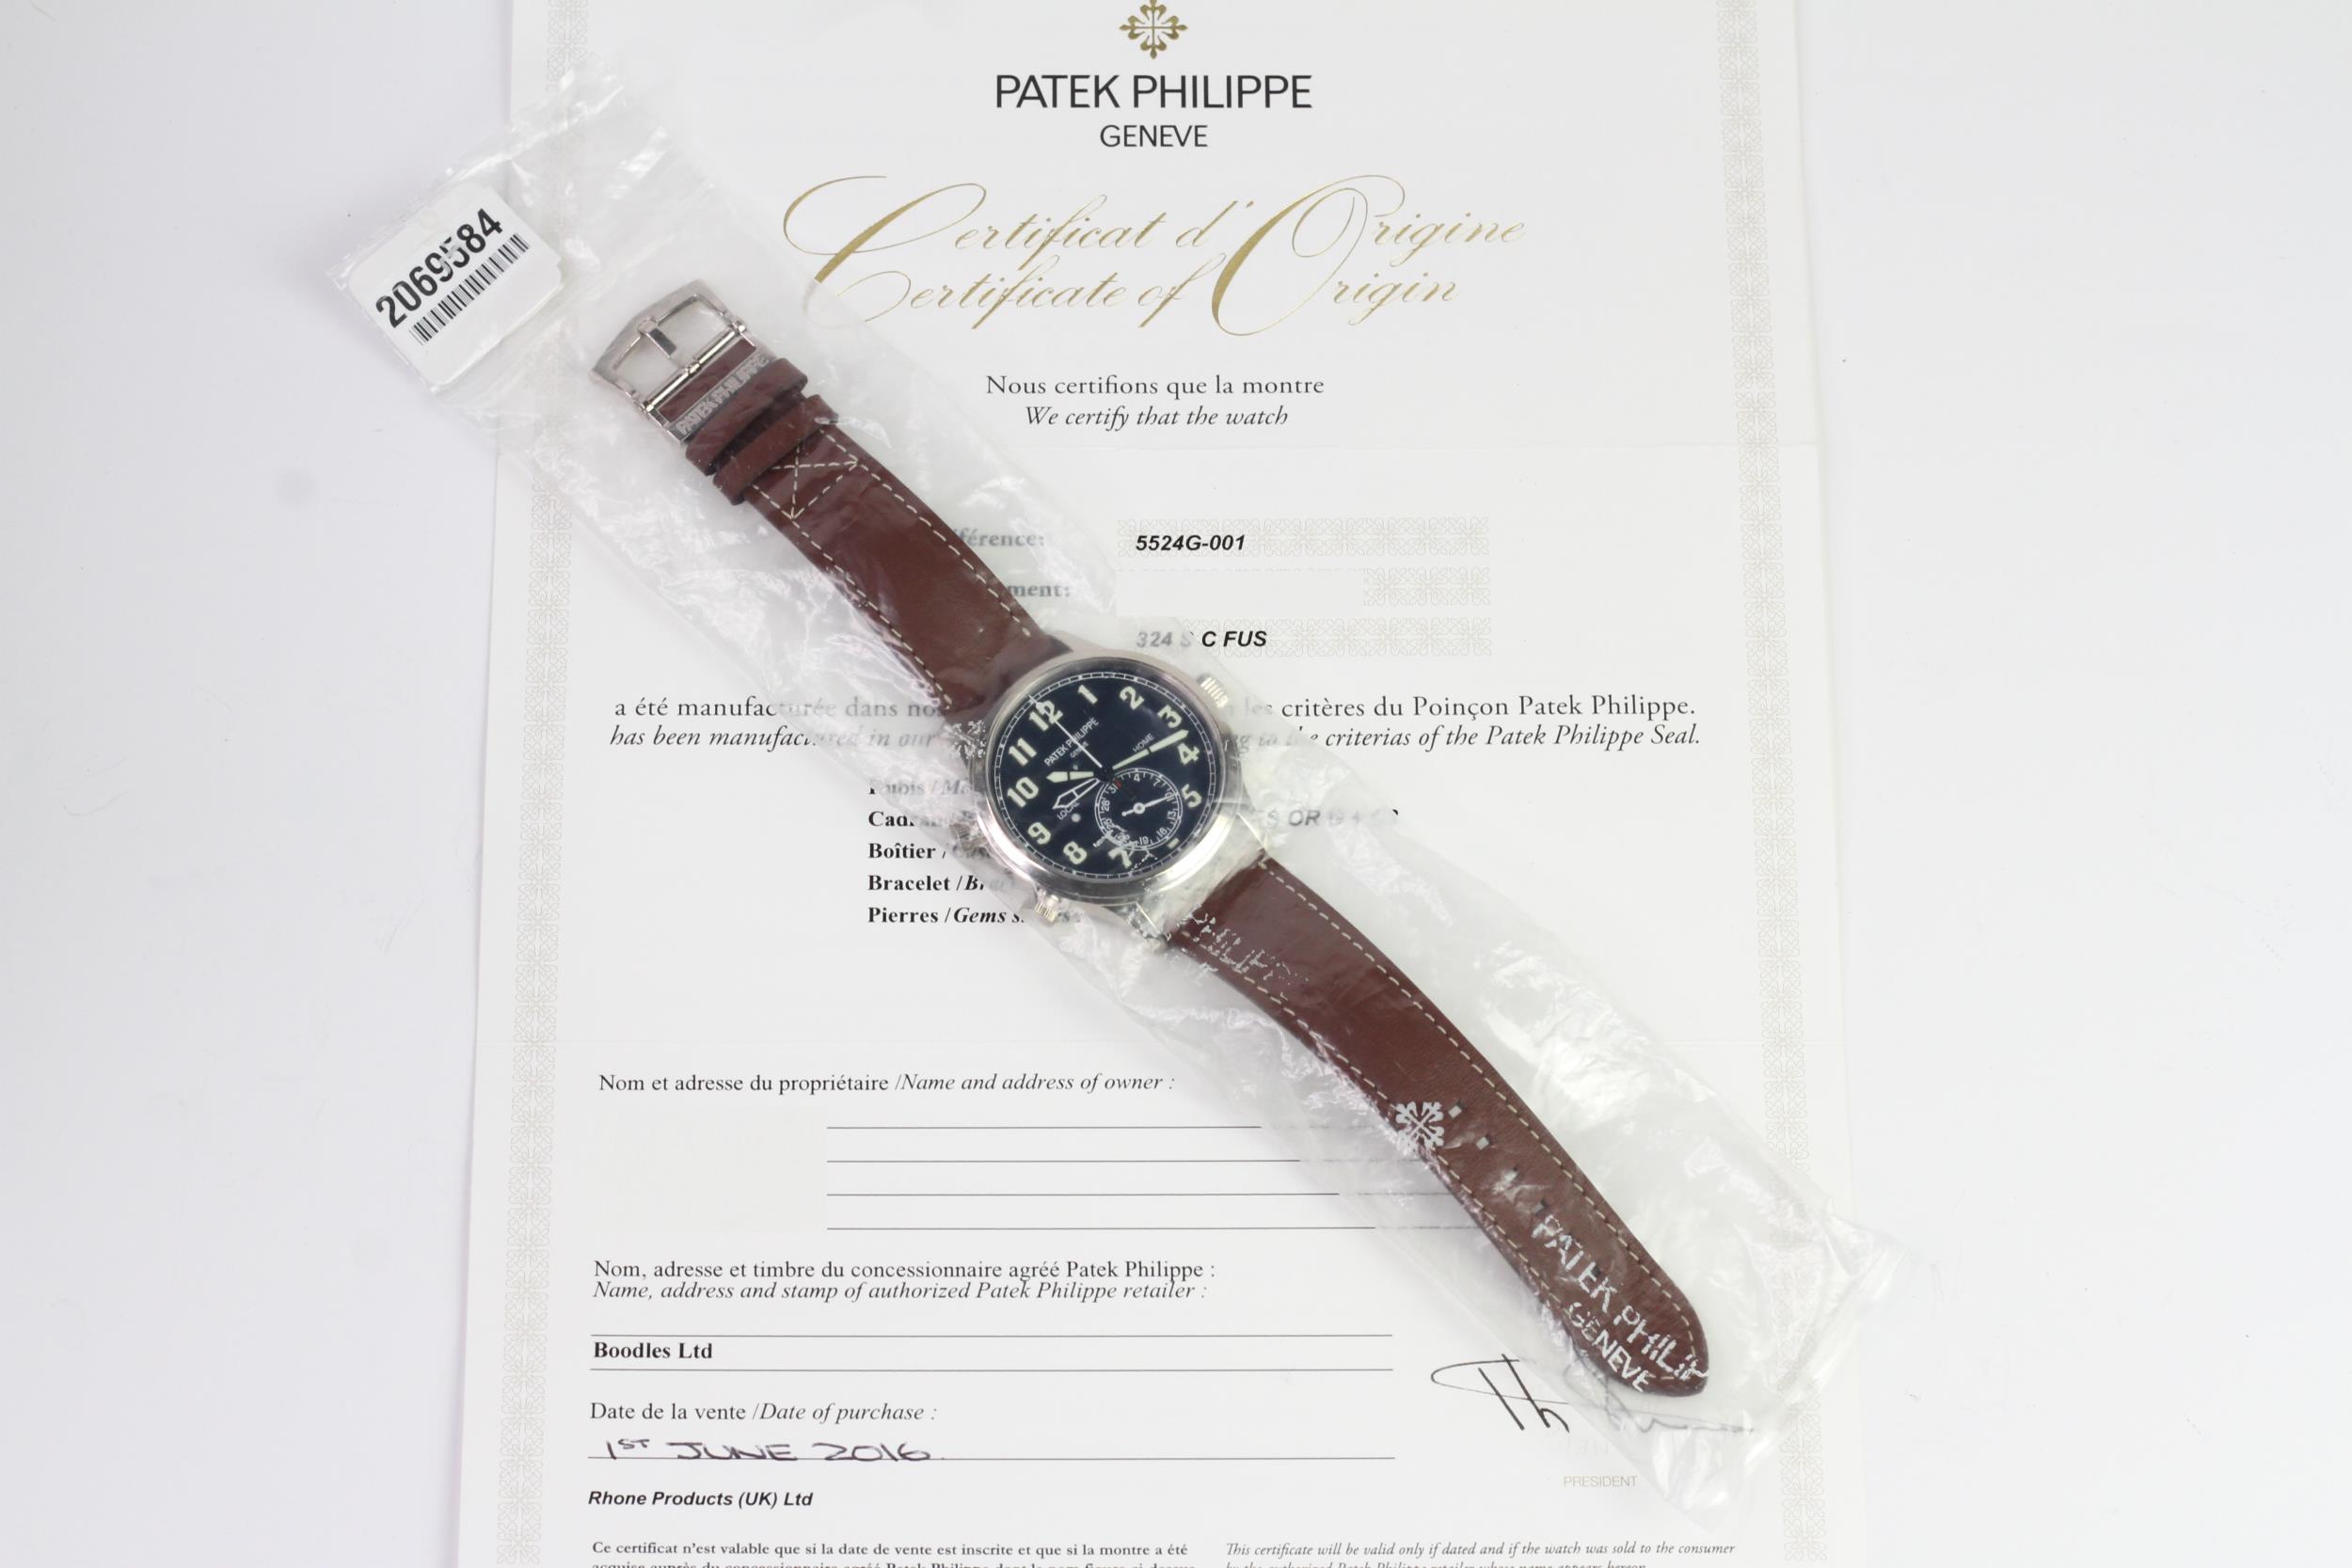 A FINE PATEK PHILIPPE CALATRAVA PILOT TRAVEL TIME REFERENCE 5224G-001, SEALED FROM SERVICE, WITH BOX - Image 4 of 19